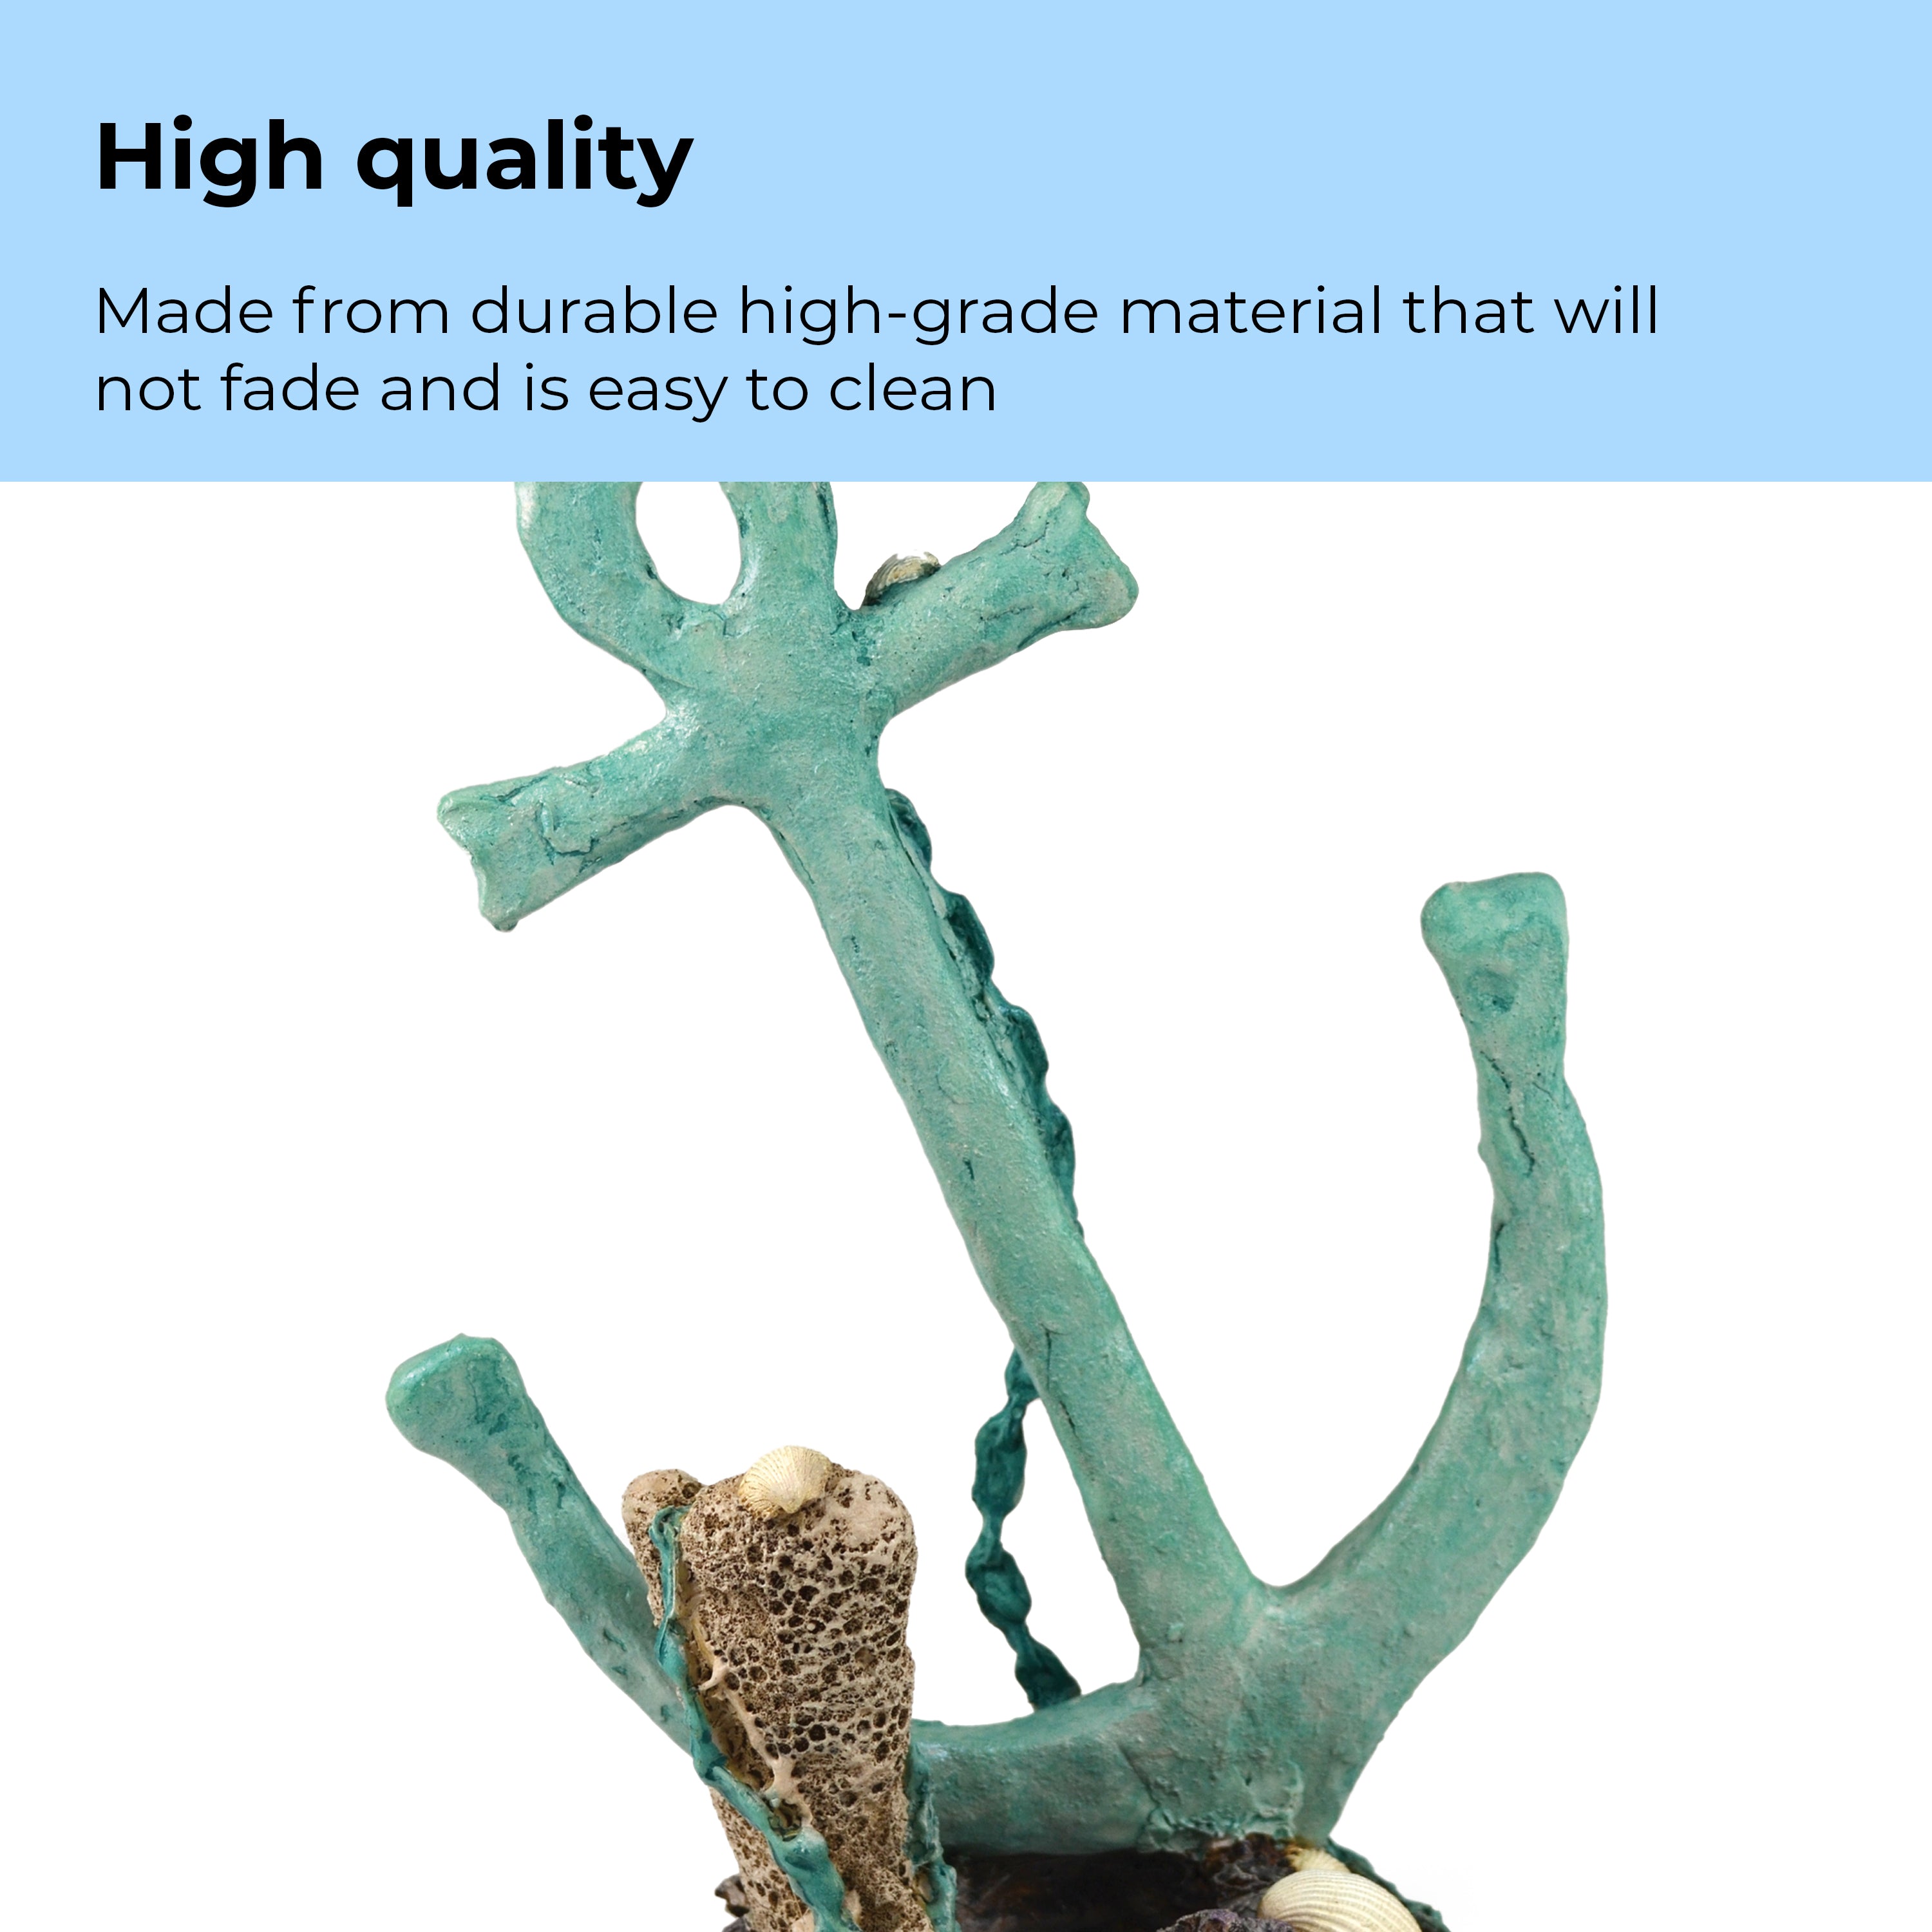 Anchor Sculpture made from durable high quality material